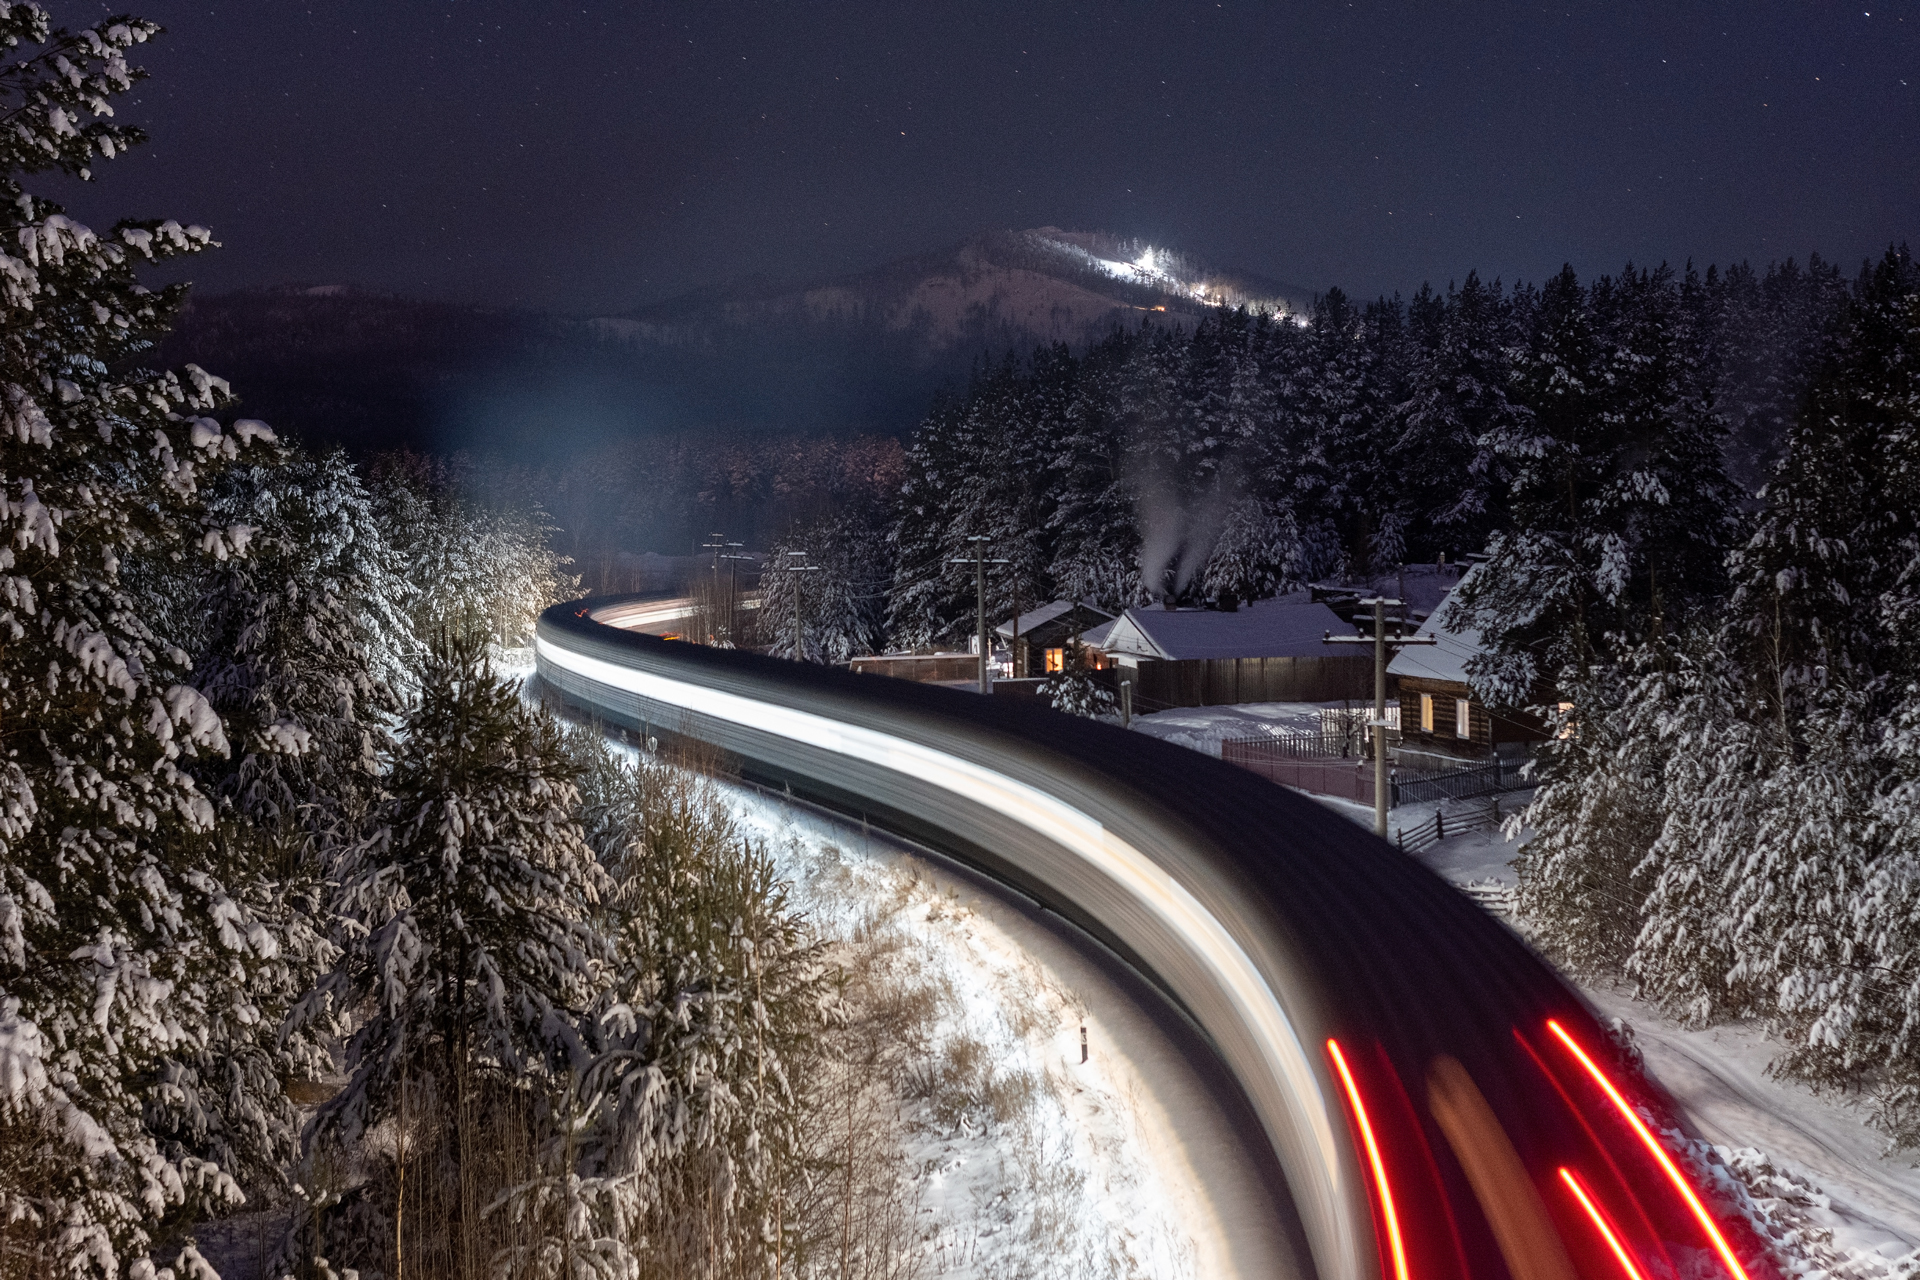 Nature Landscape Winter Snow Road Long Exposure Motion Blur Night Forest Trees House Cabin Stars Mou 1920x1280